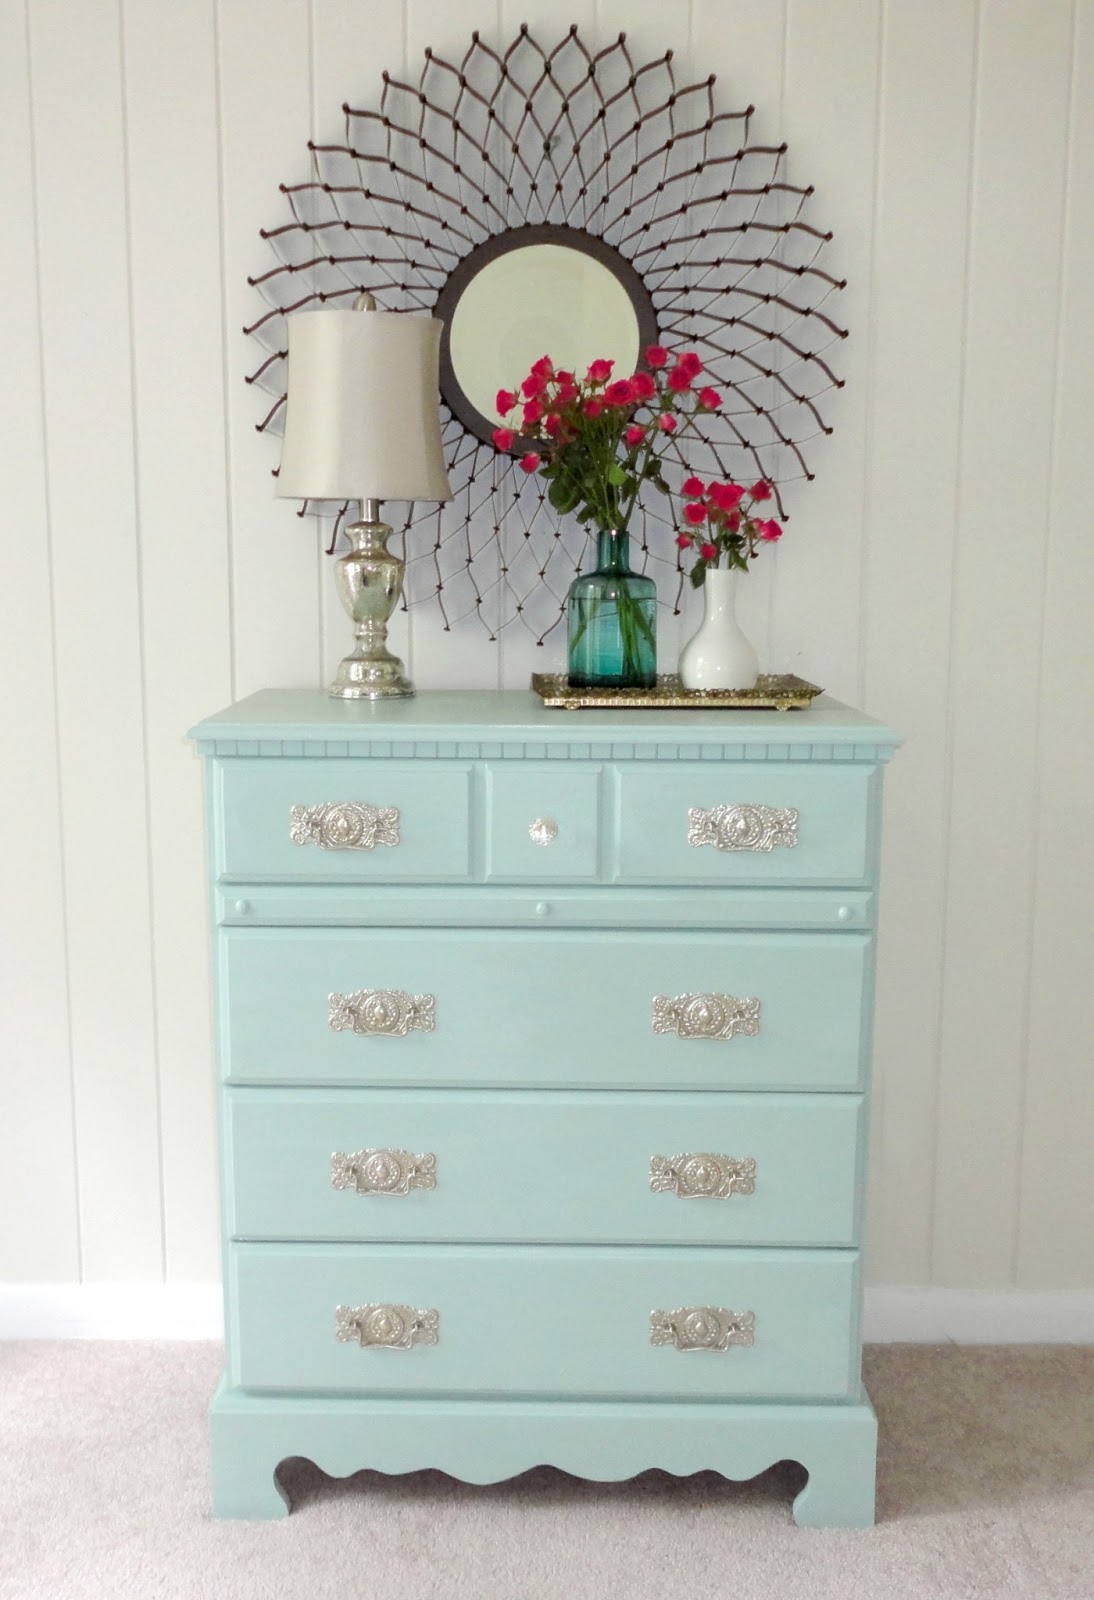 How To Paint Laminate Furniture In 3, Painting A Dresser Without Sanding